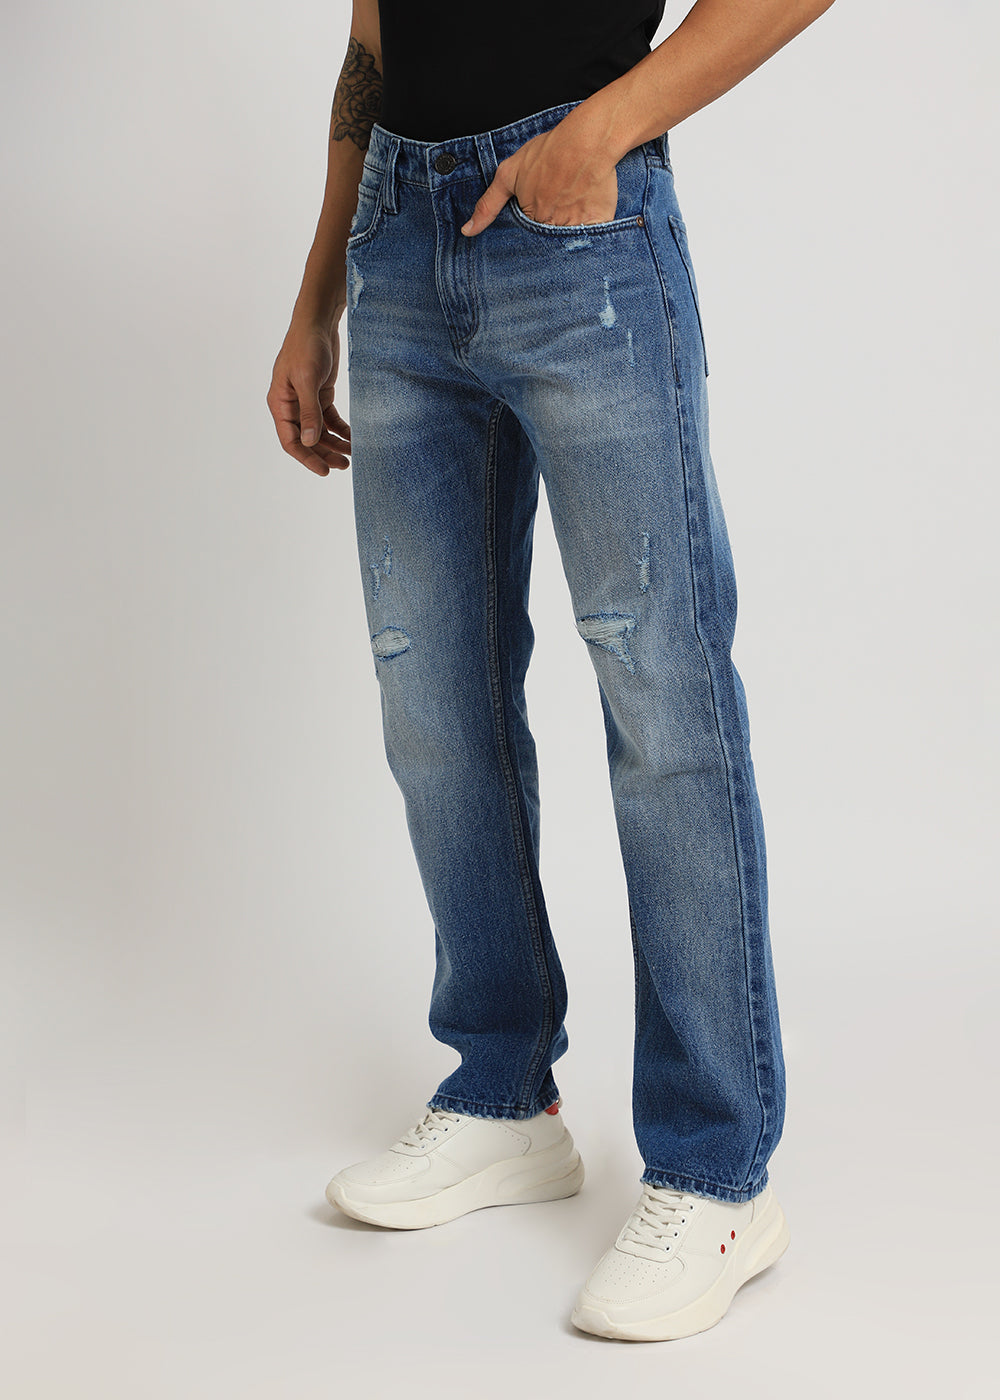 Afina Ribbed Blue Straight fit Jeans